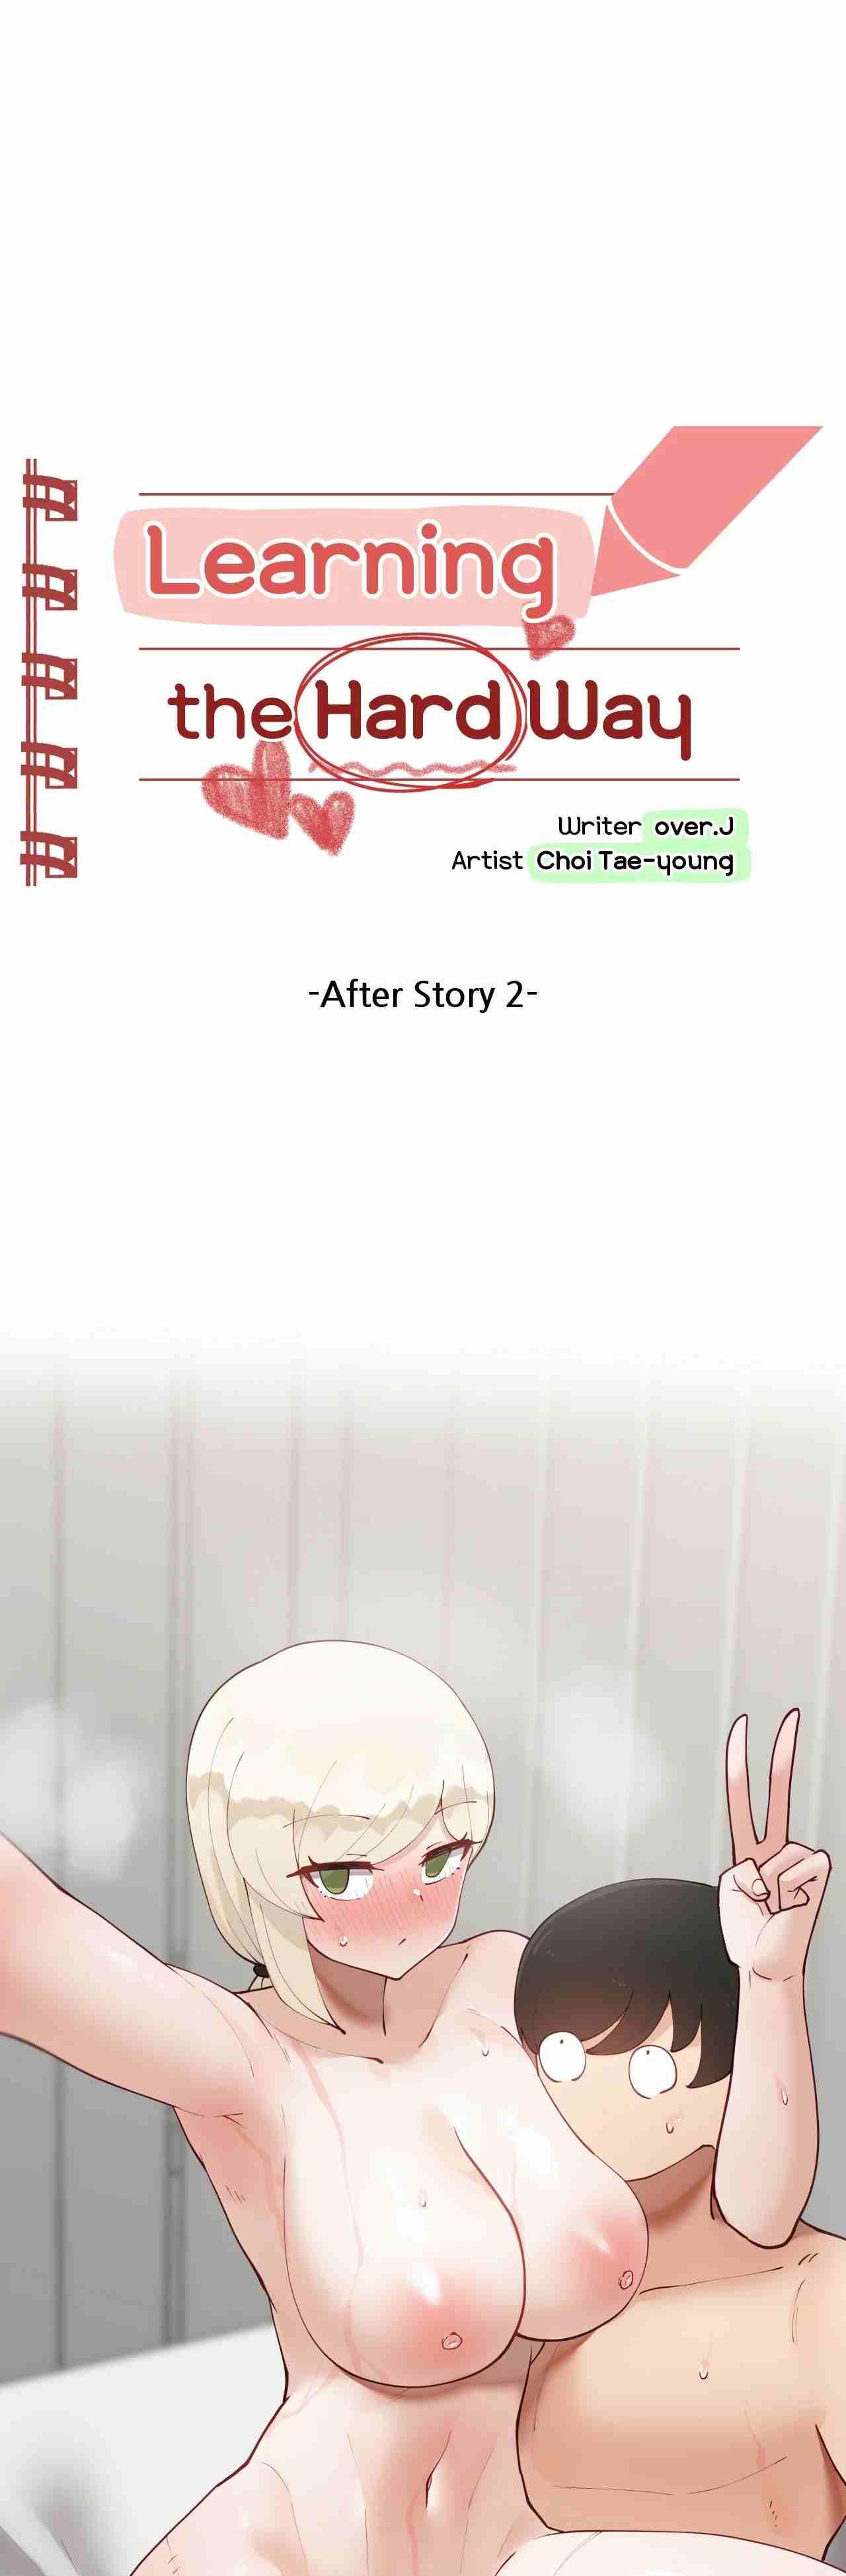 [Over.J, Choi Tae-young] Learning the Hard Way 2nd Season (After Story) Ch.4/? [English] [Manhwa PDF] Ongoing 49